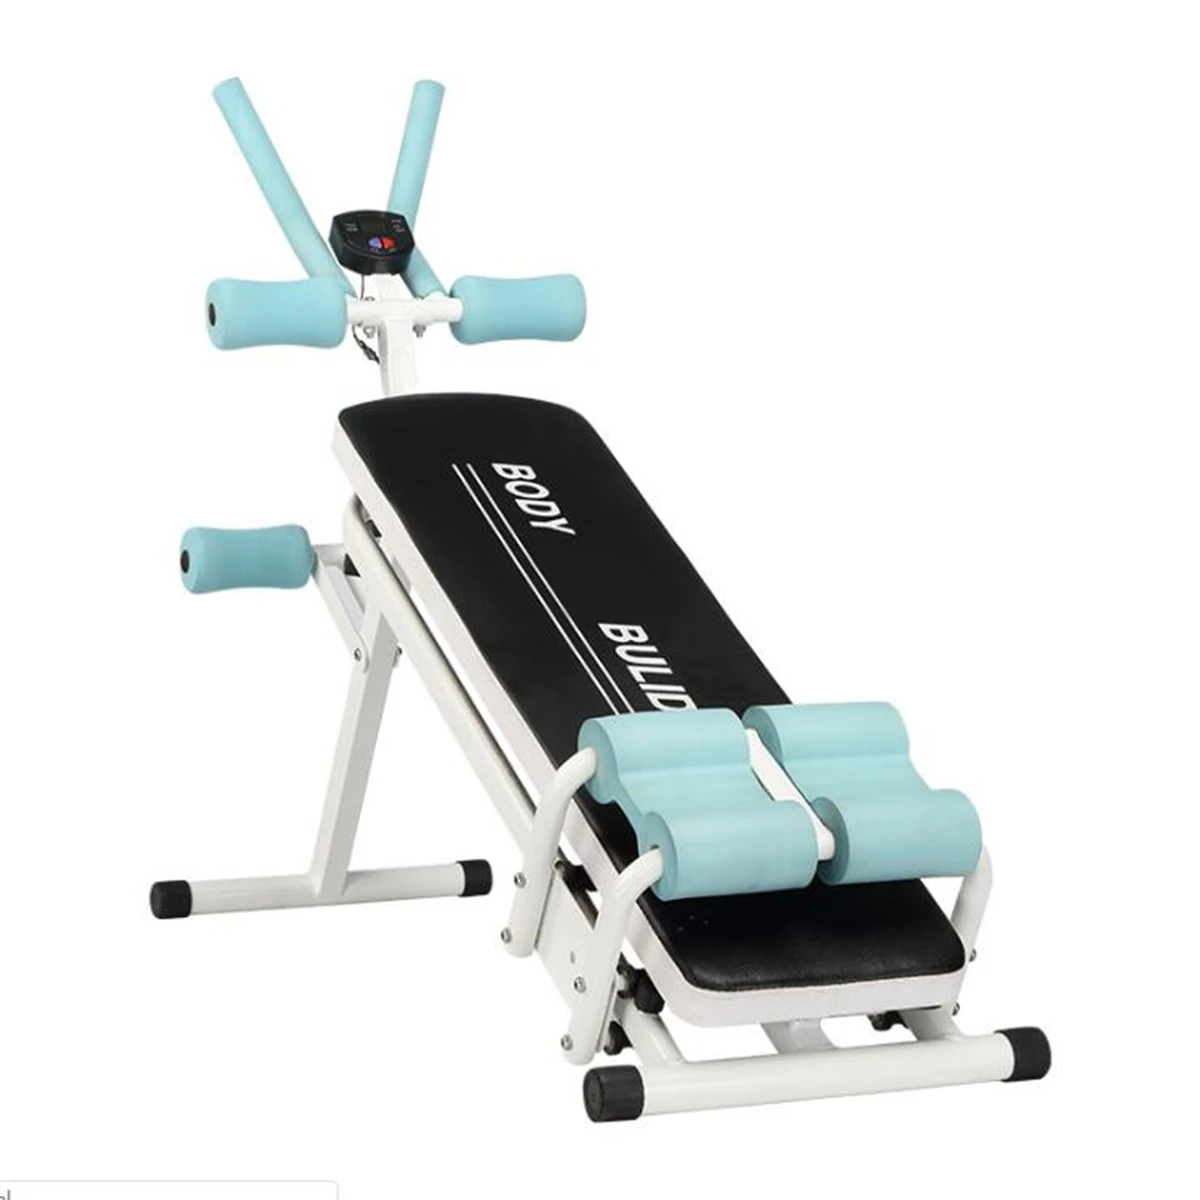 GRT Fitness H49e34c98f25f45dcb0a235b12d151035v 3 Levels Adjustable Sit Up Benches Abdominal Muscle Trainer Multifunction Abs Workout Lose Weight Home Gym Fitness Equipment 